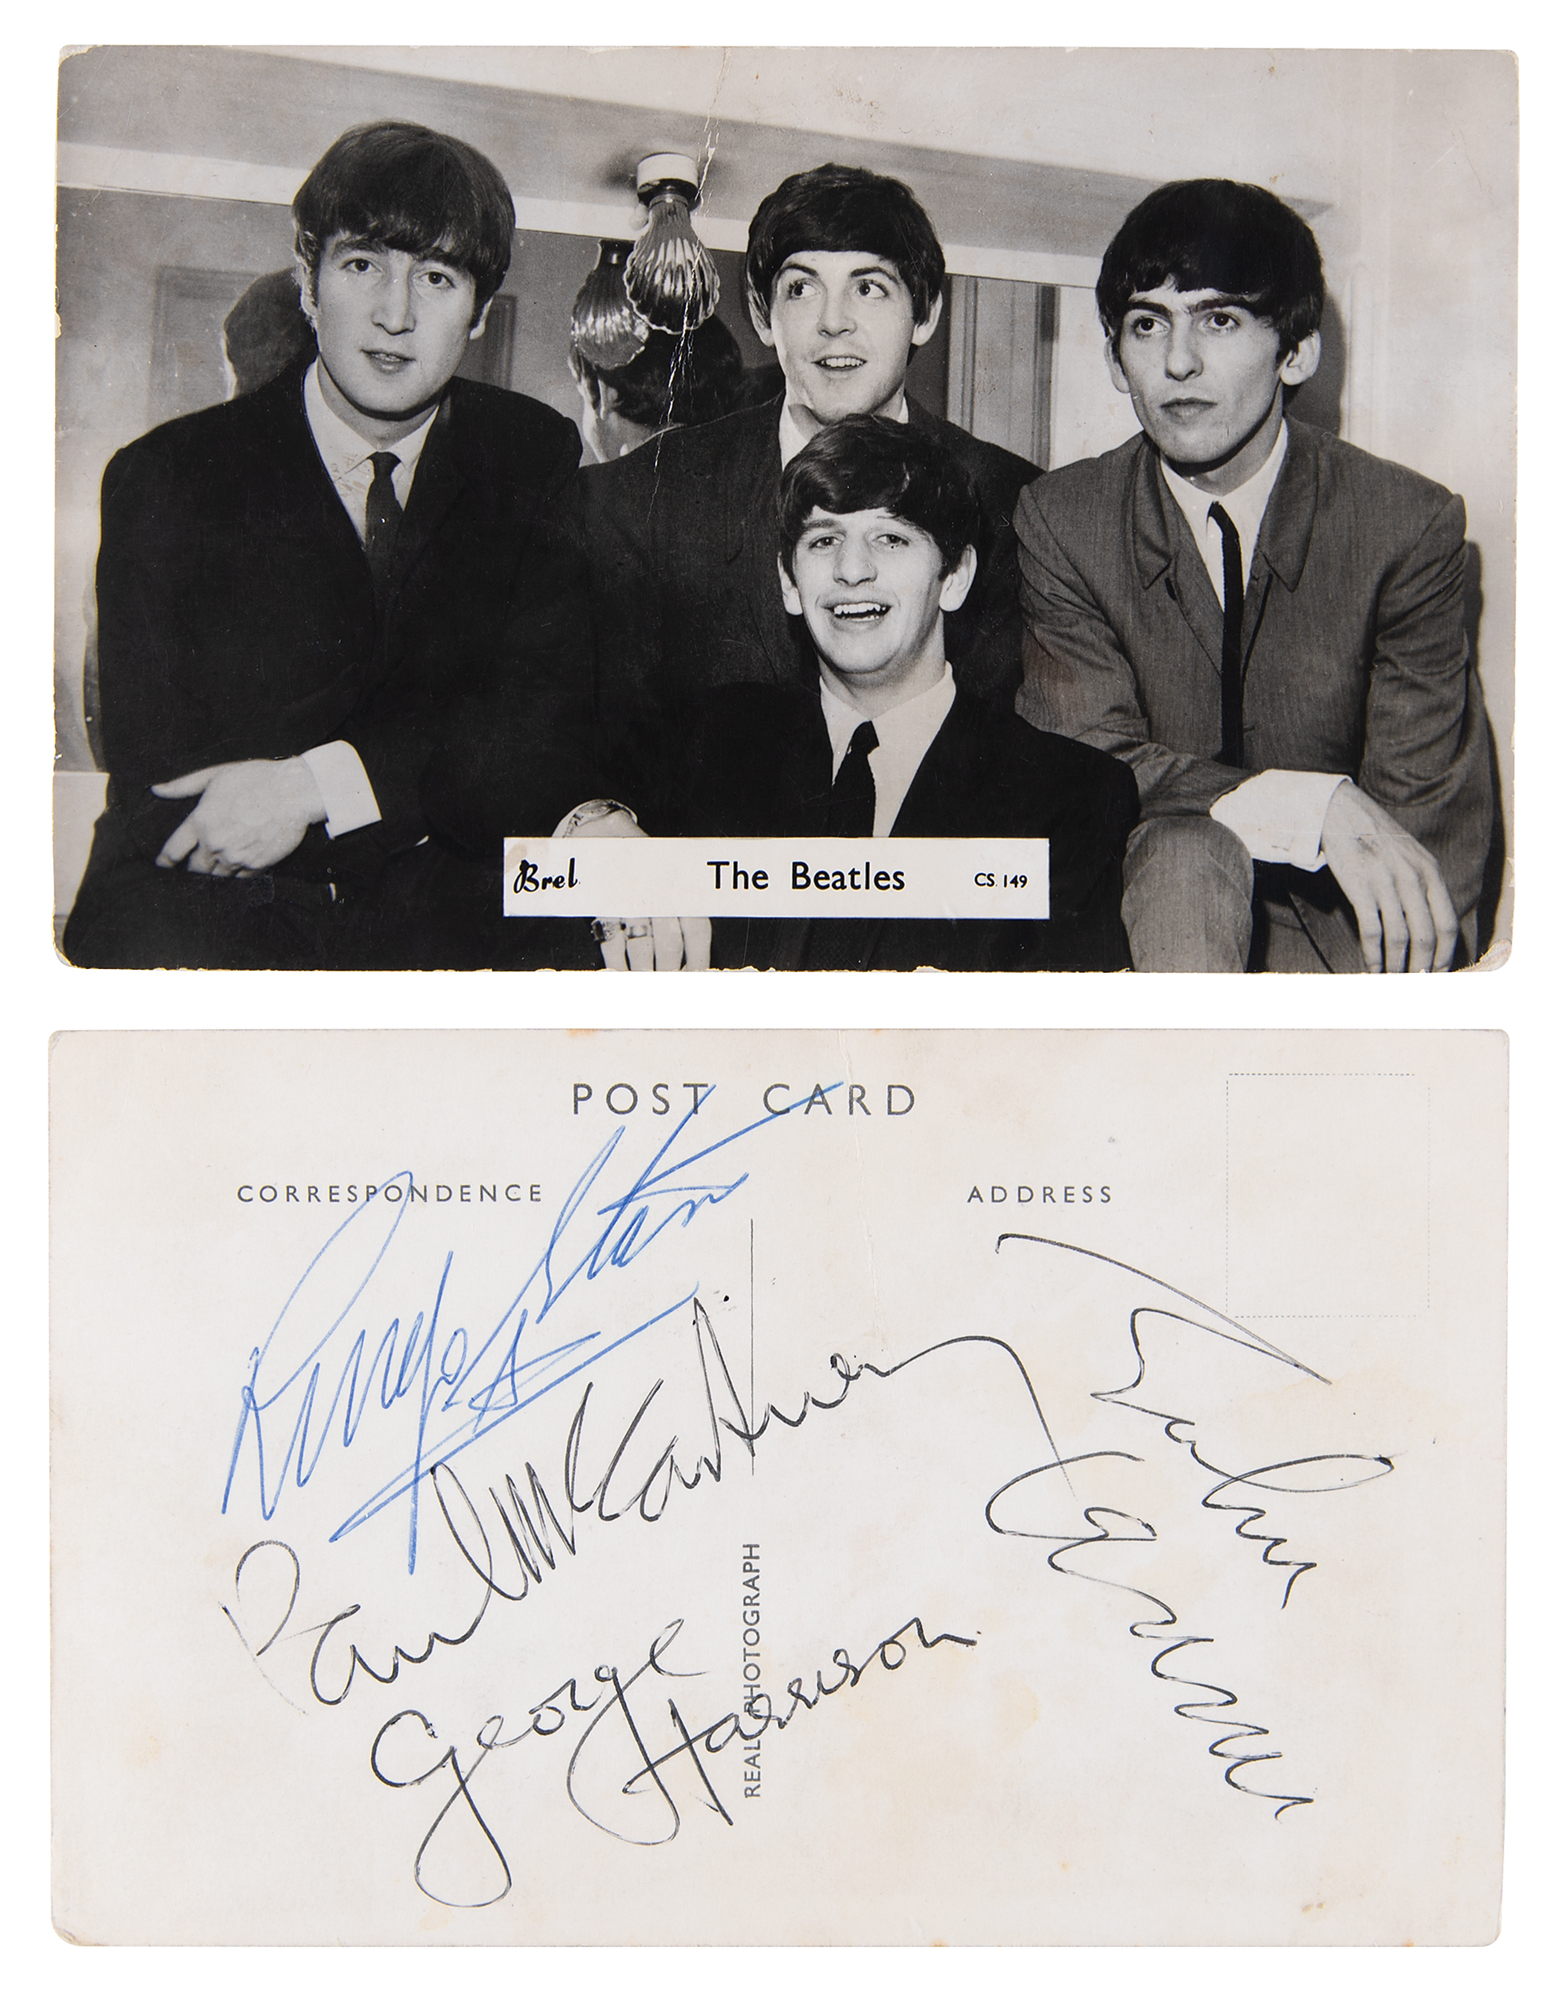 Beatles Signed 'Brel' Photograph - Dating to Their